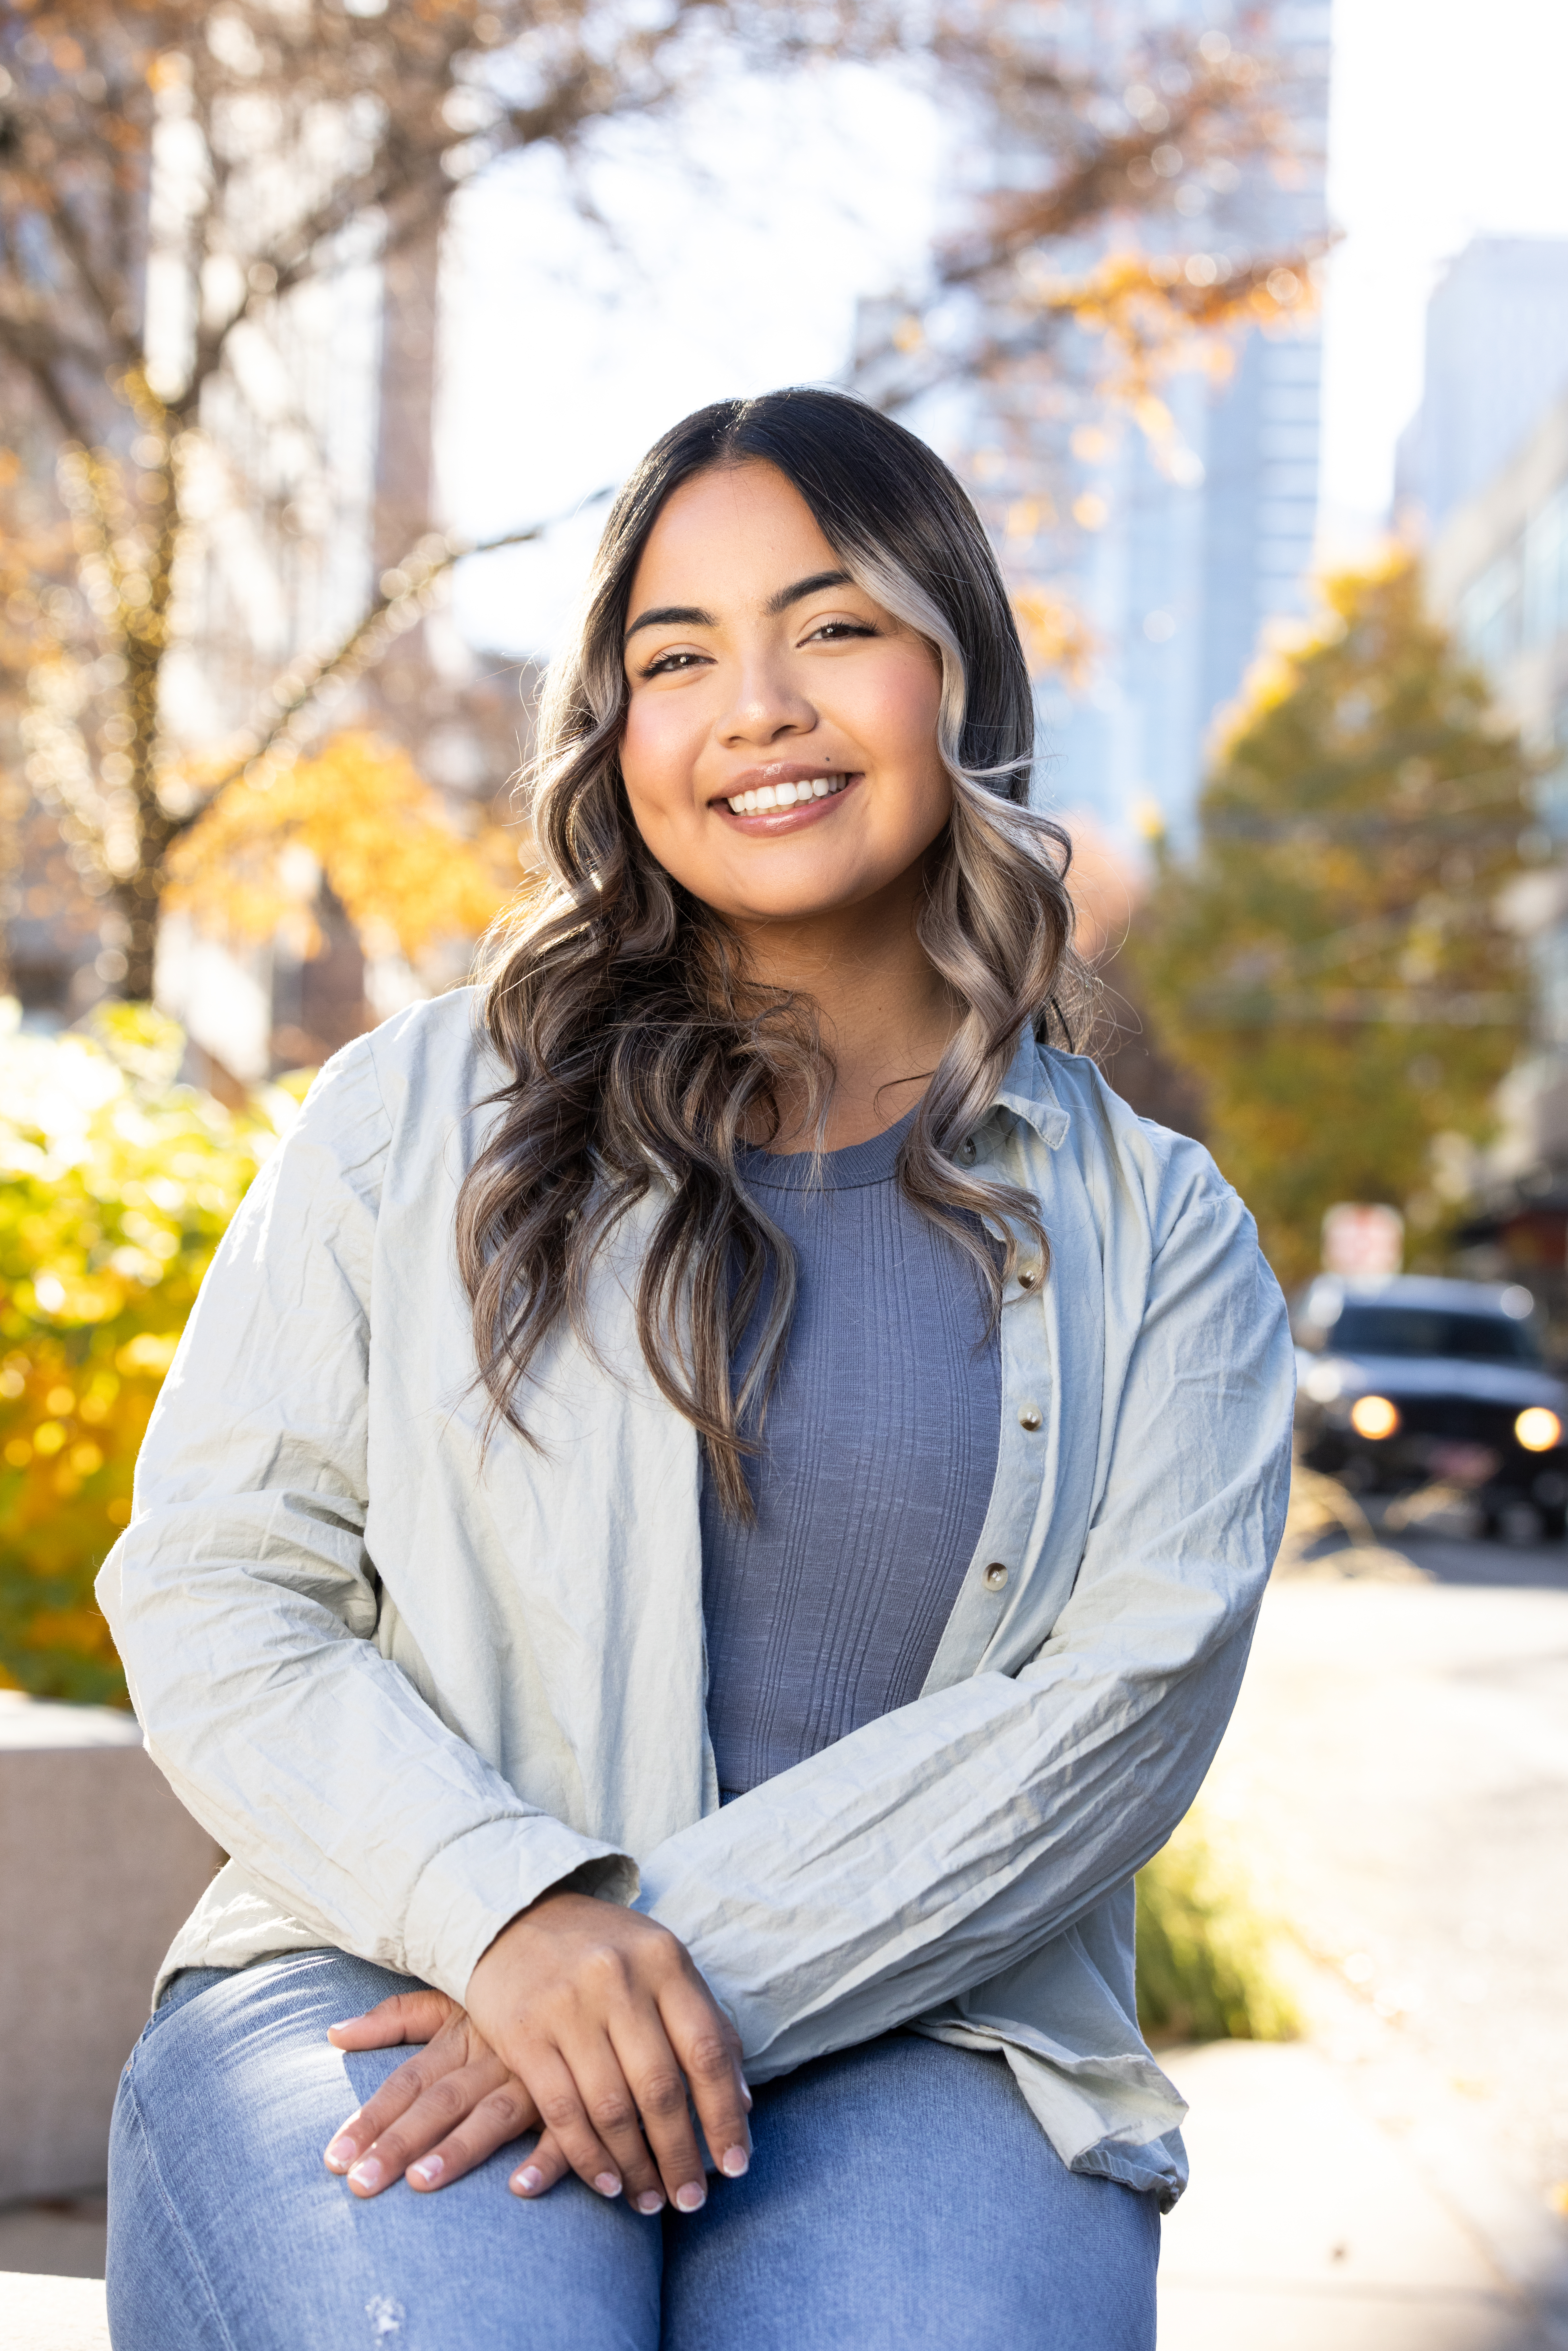 Woman smiling for a headshot outside in a city